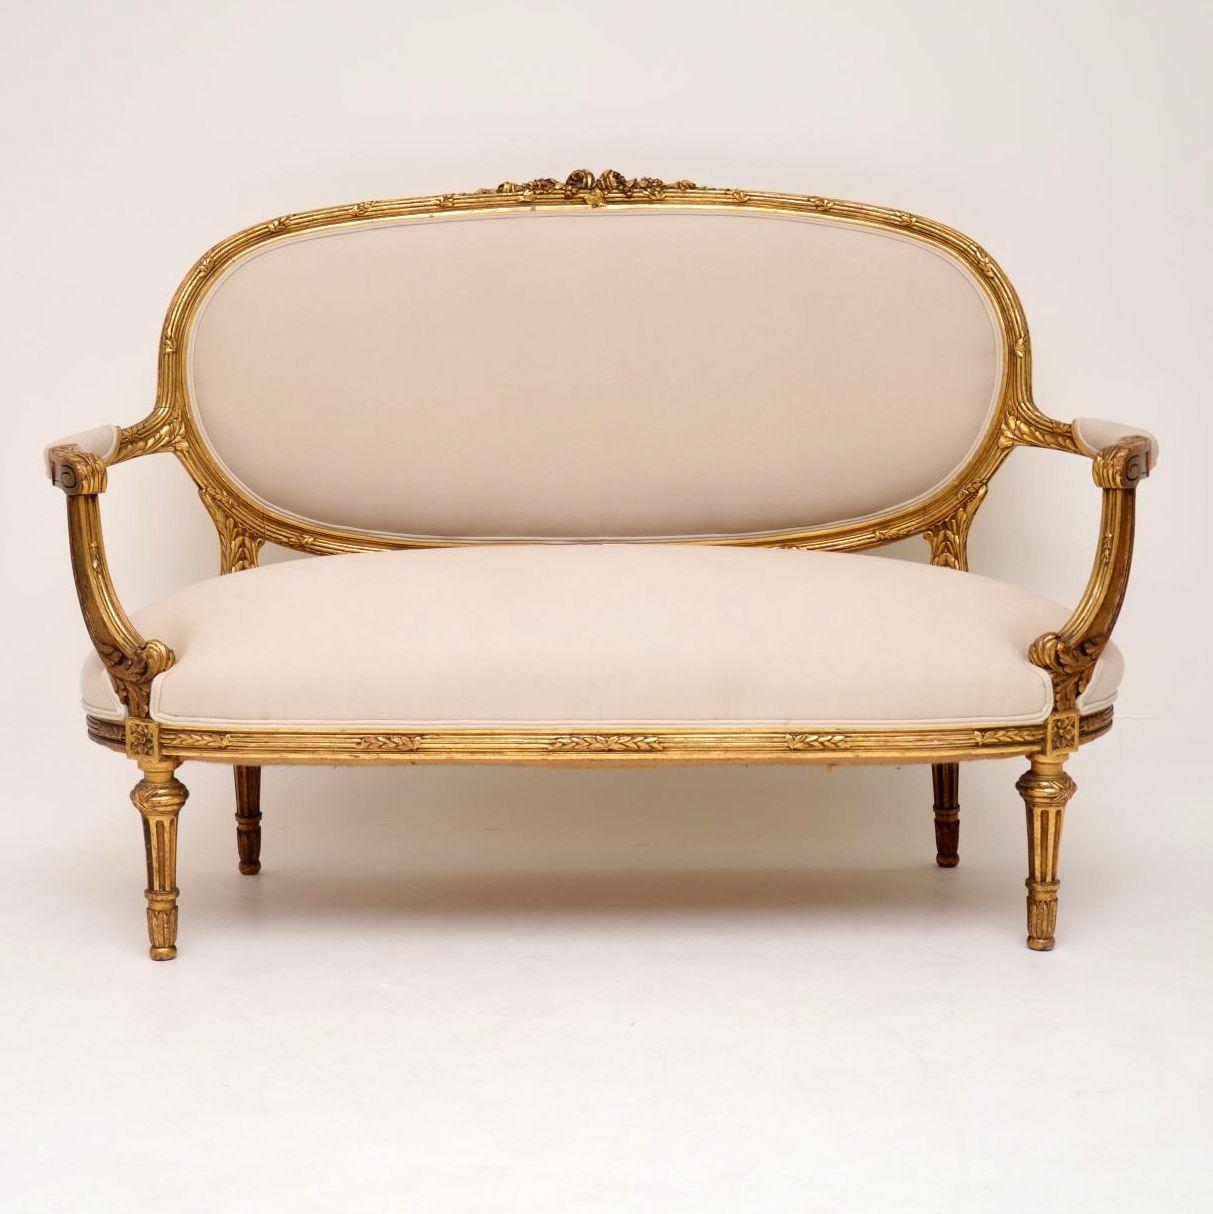 This antique French giltwood sofa is in very good condition and I would date it to circa 1850s period. The frame is beautifully hand carved all over and the gilding is original with some natural wear showing through in places. We didn’t want to mess